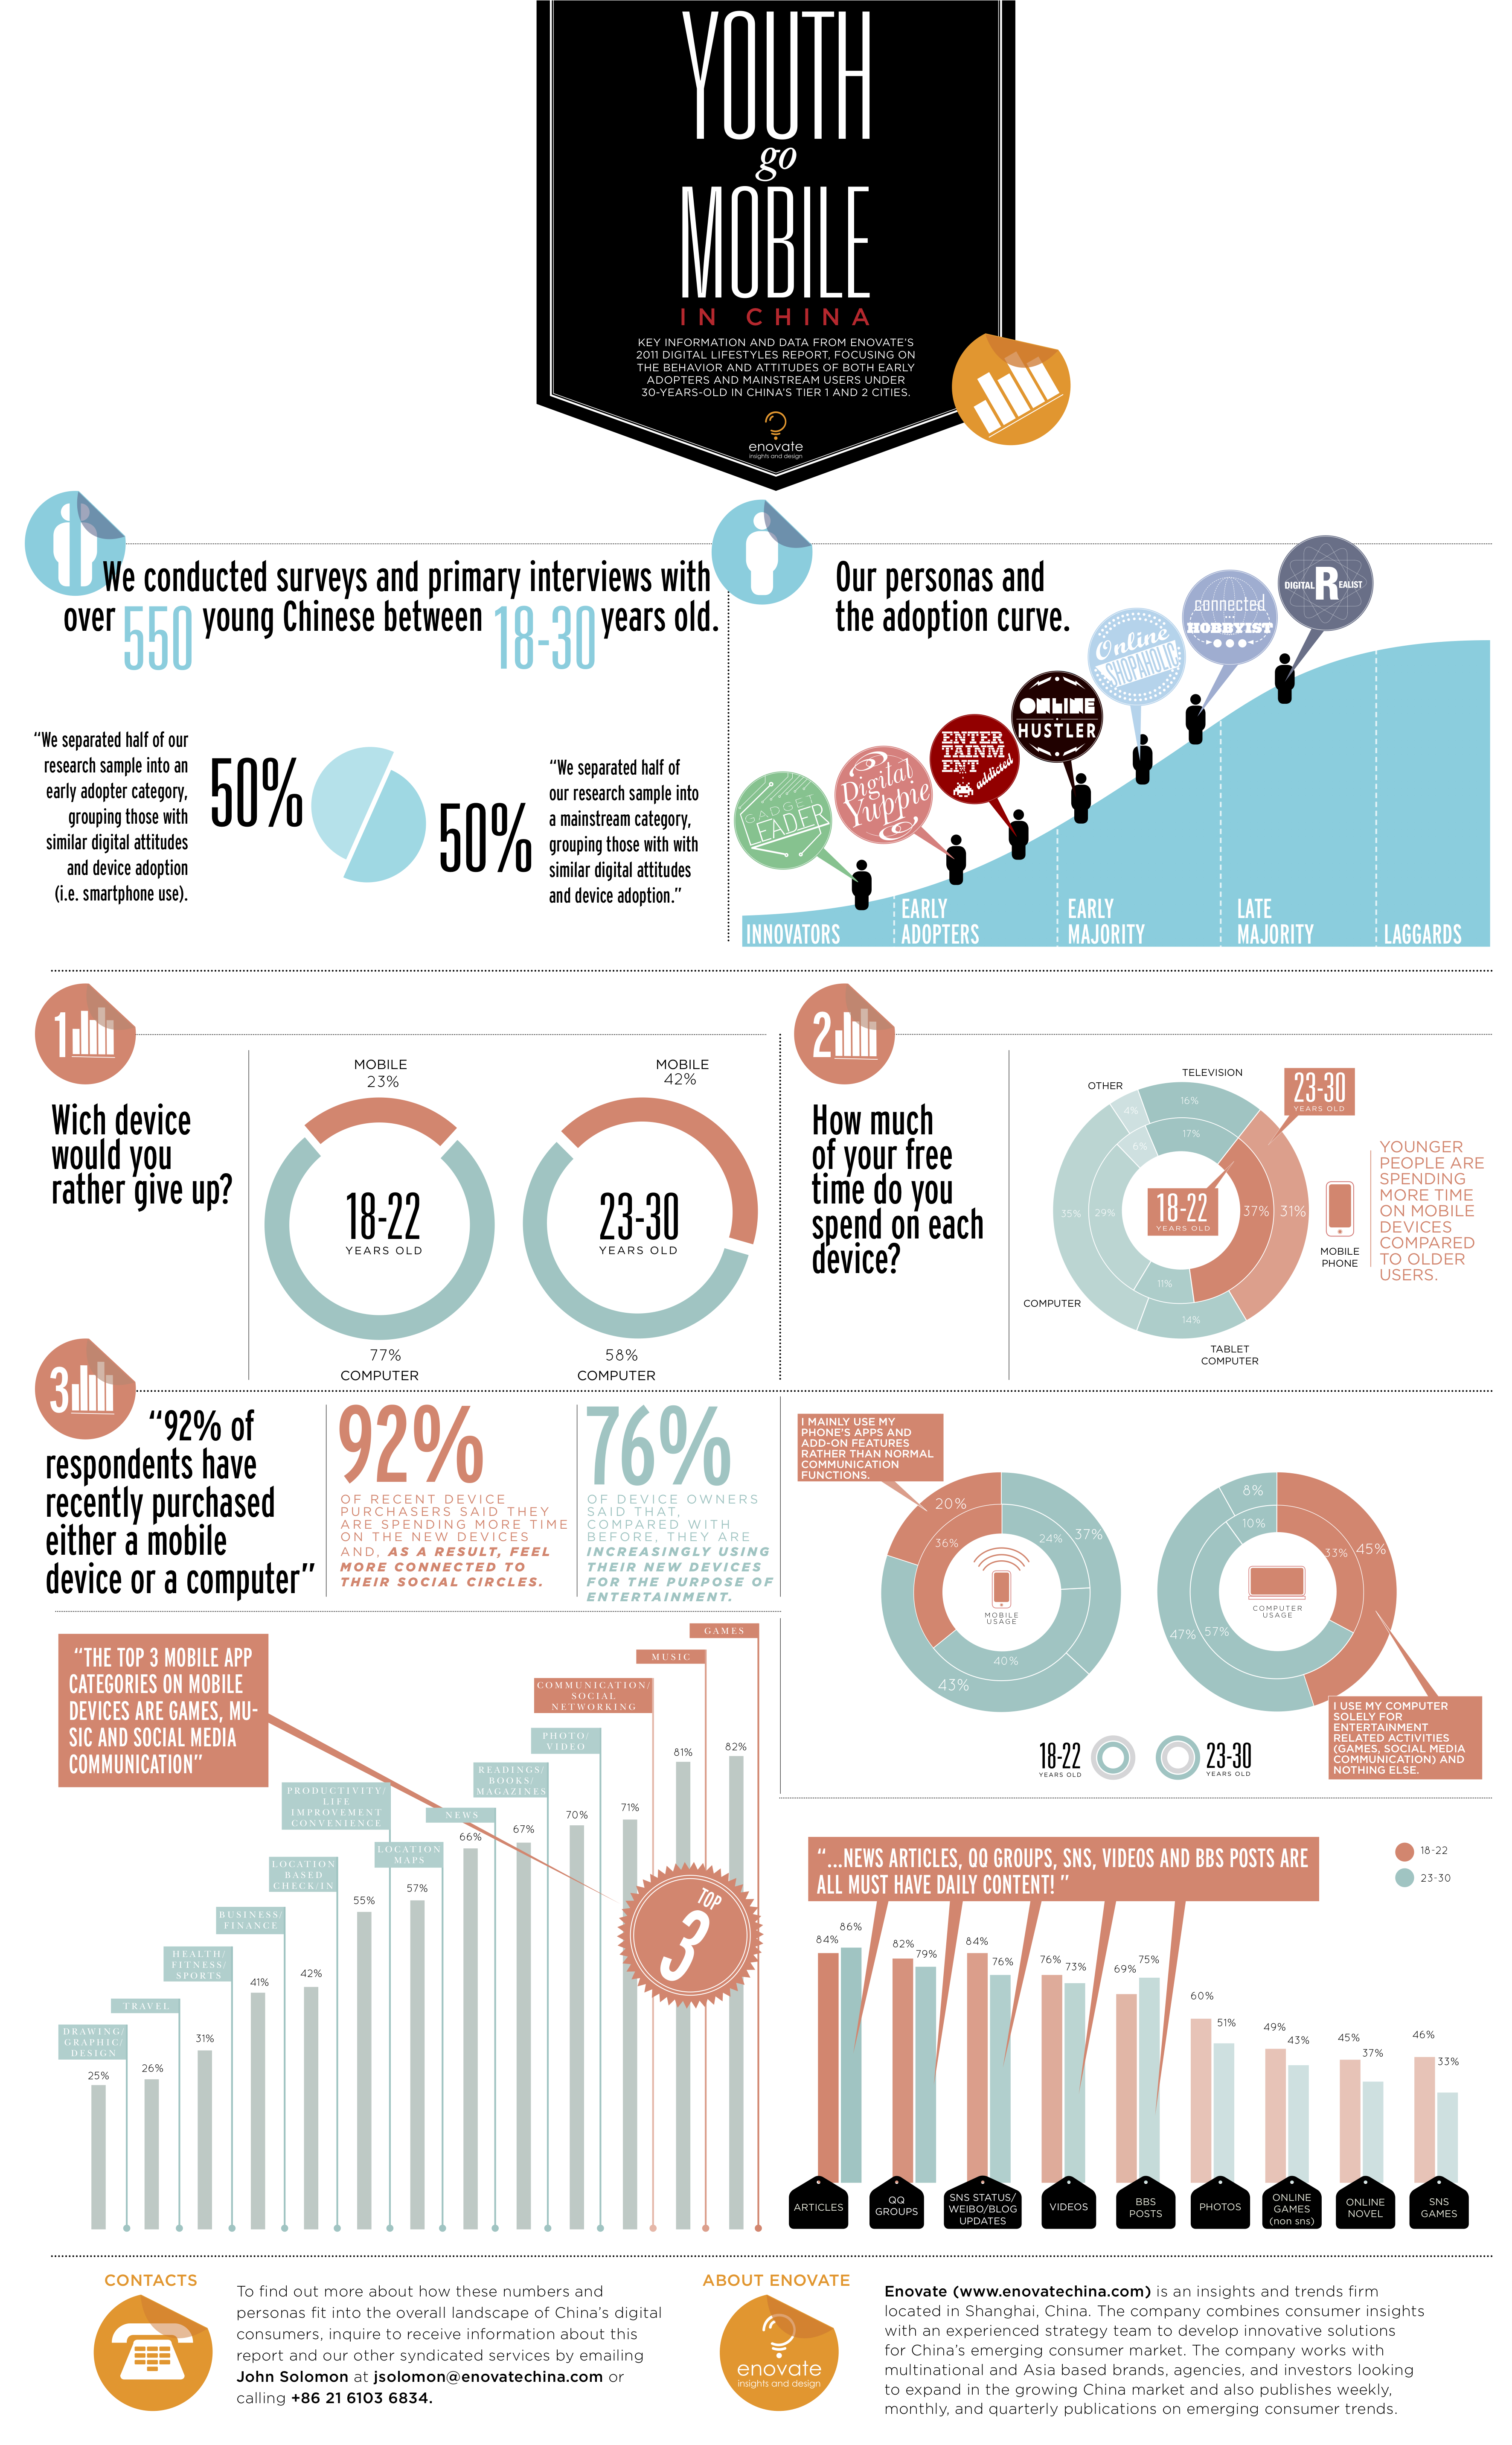 Youth Go Mobile in China (Enovate.com infographic 2011)